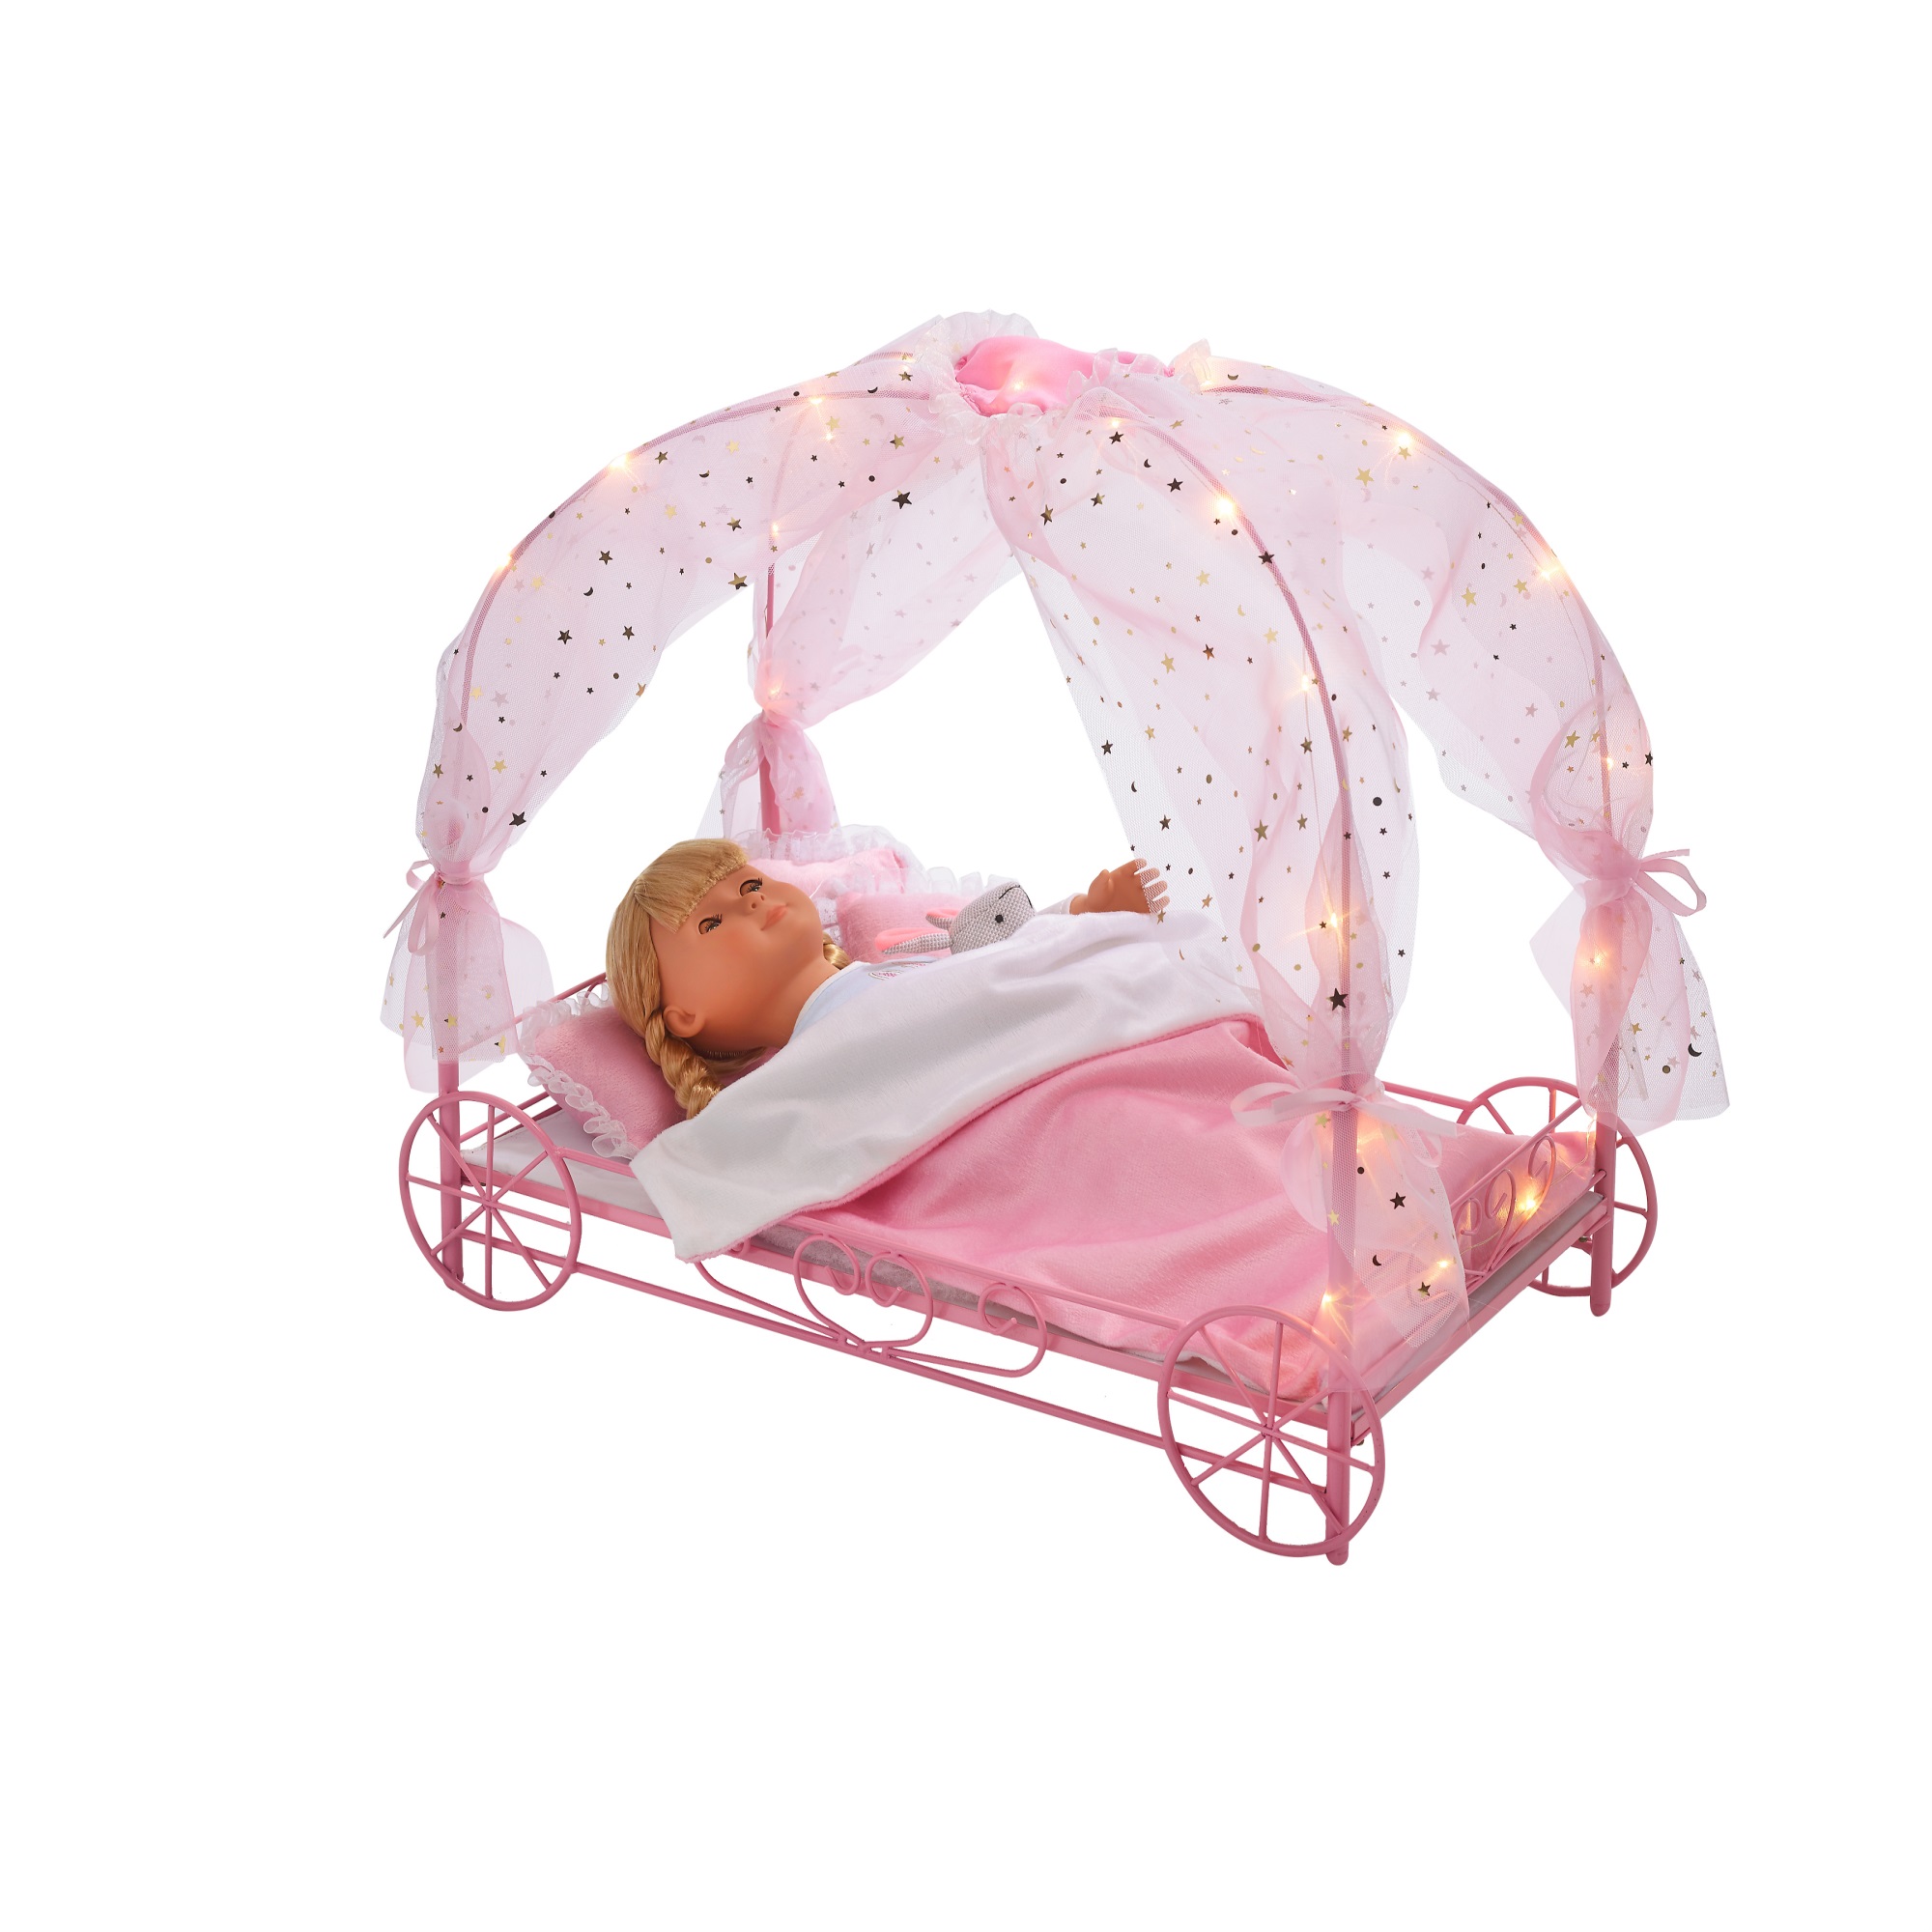 Badger Basket Royal Carriage Metal Doll Bed with Canopy, Bedding and LED Lights - Pink/White/Stars